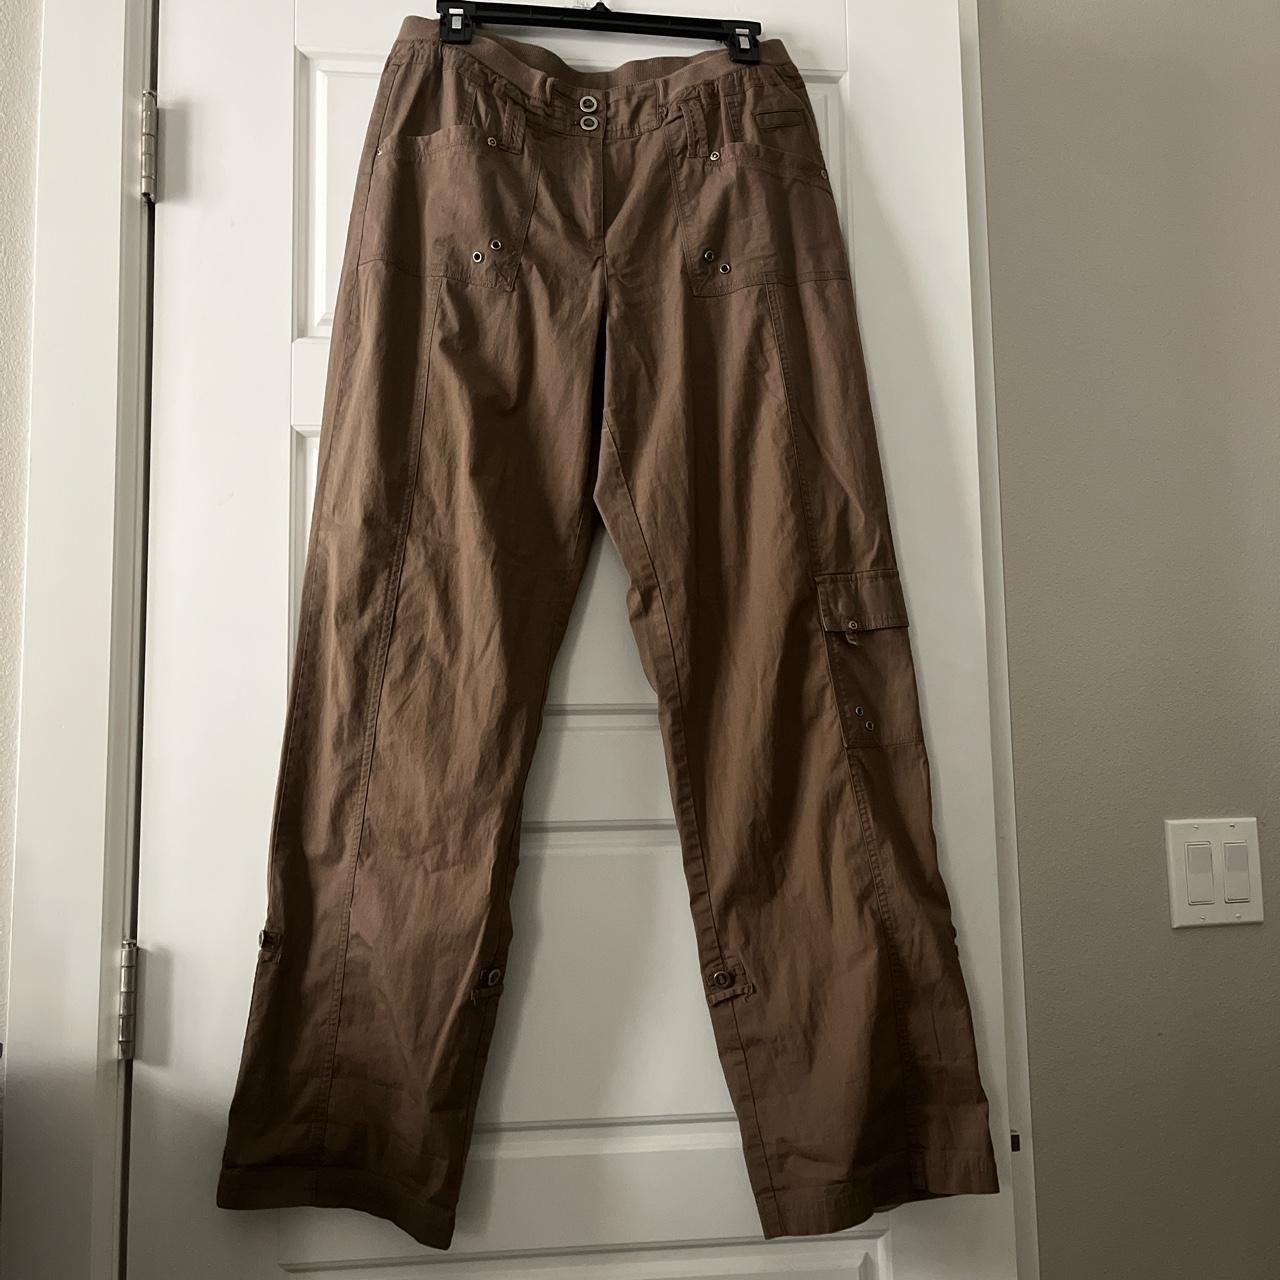 Chico's Women's Khaki and Brown Trousers | Depop